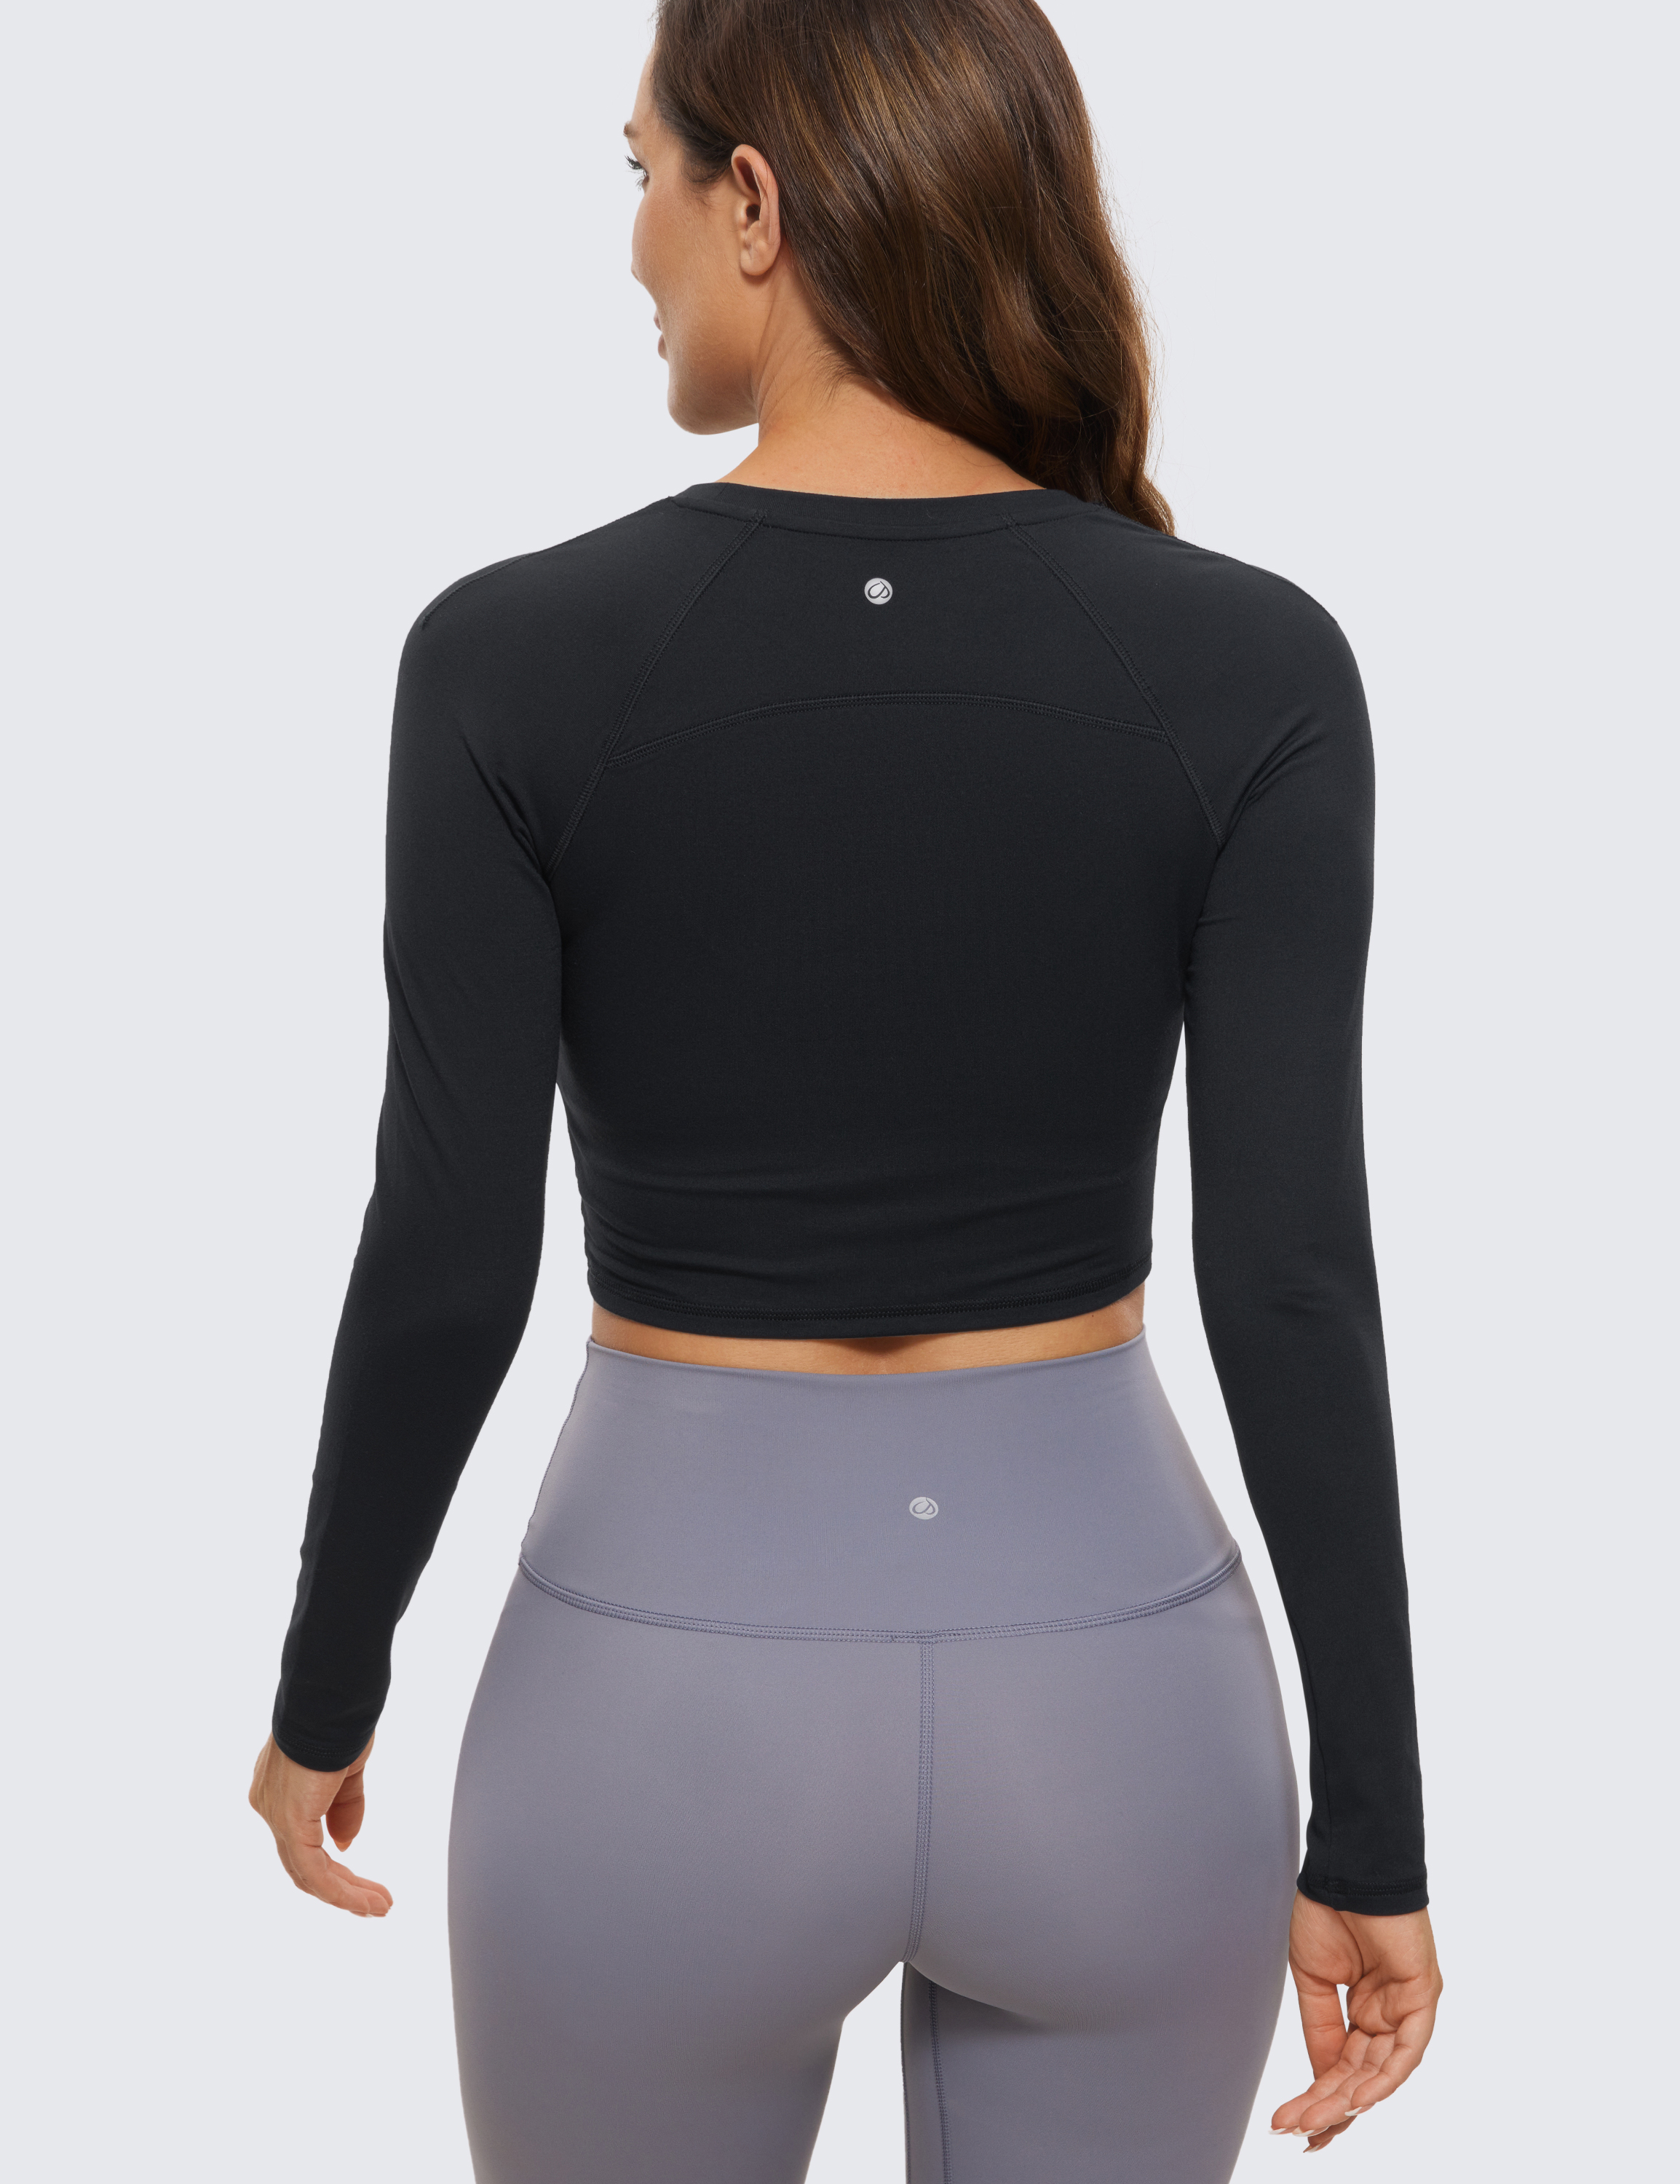 CRZ YOGA Brushed Womens Long Sleeve Workout Tops High Neck Running